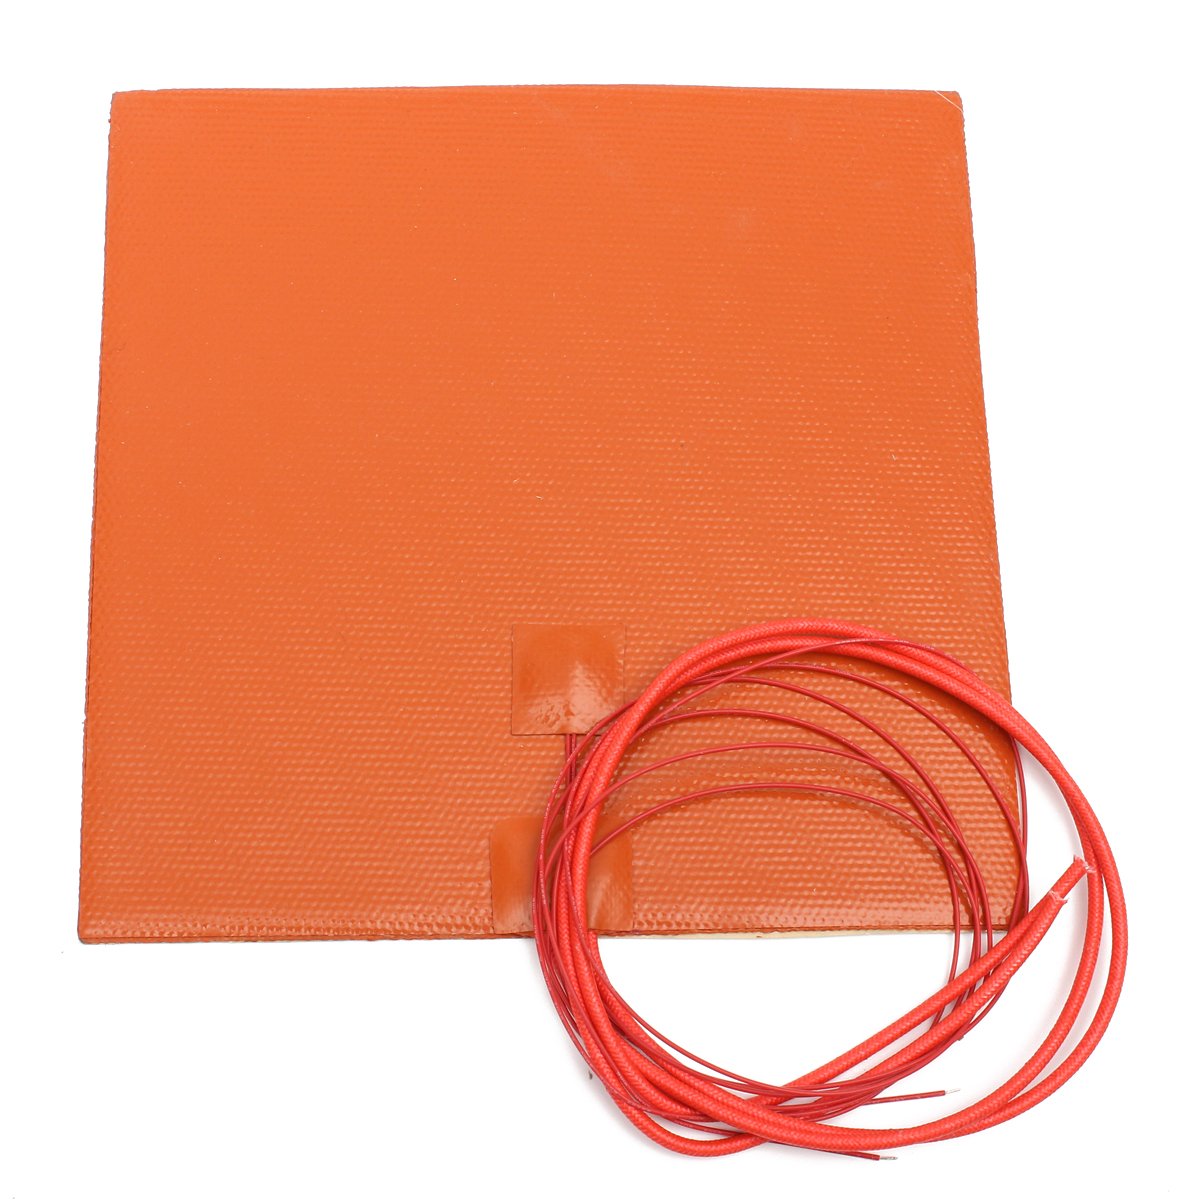 12V 200W 200mmx200mm Waterproof Flexible Silicone Heating Pad Heater For 3d Printer Heat Bed 1